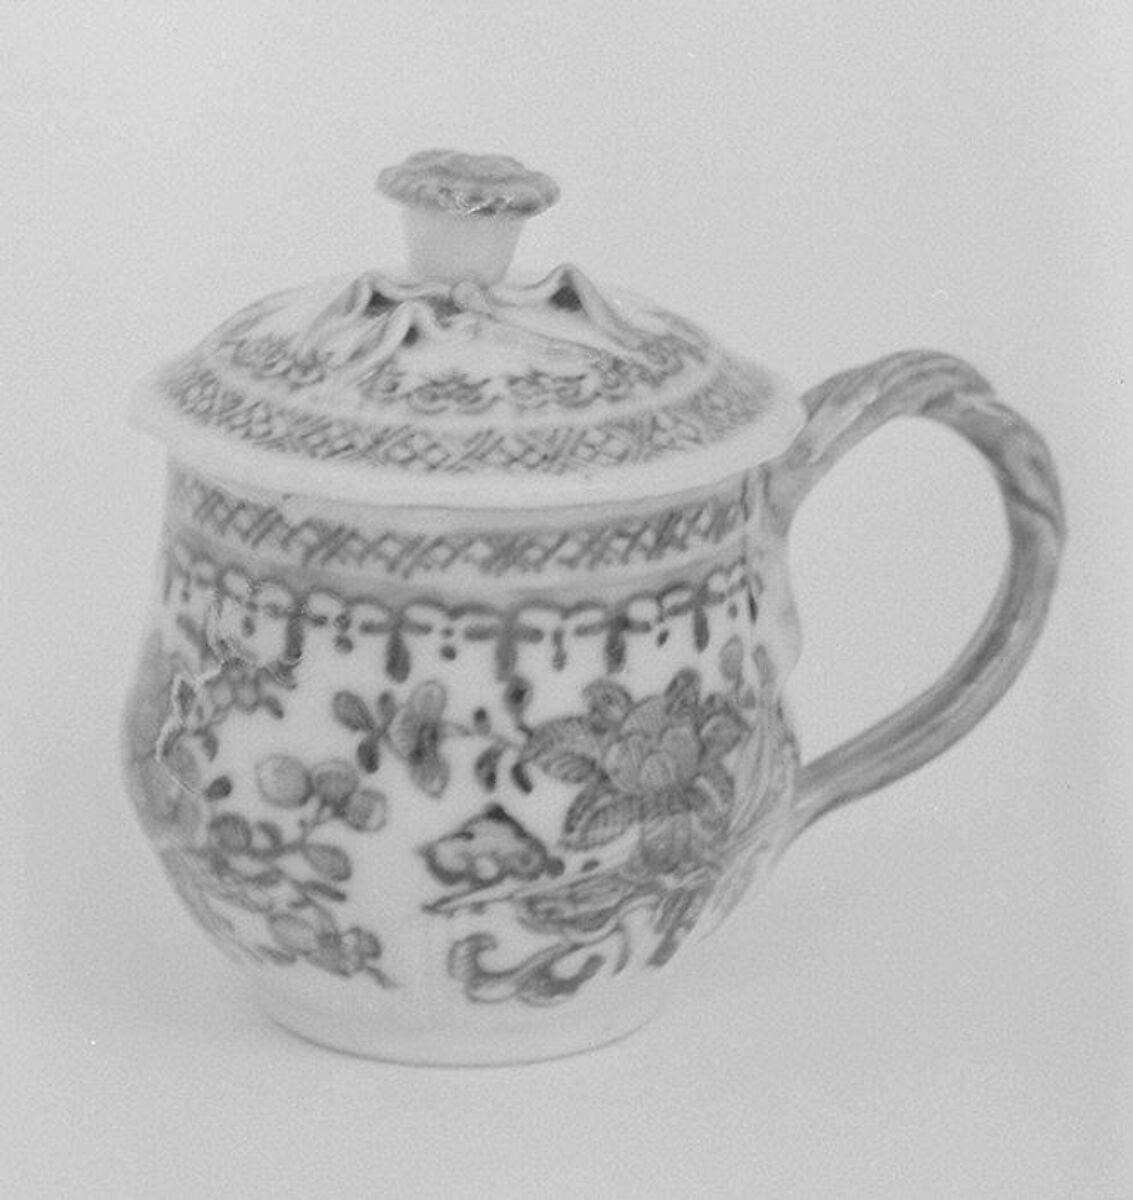 Custard cup with cover, Hard-paste porcelain, Chinese, probably for American market 